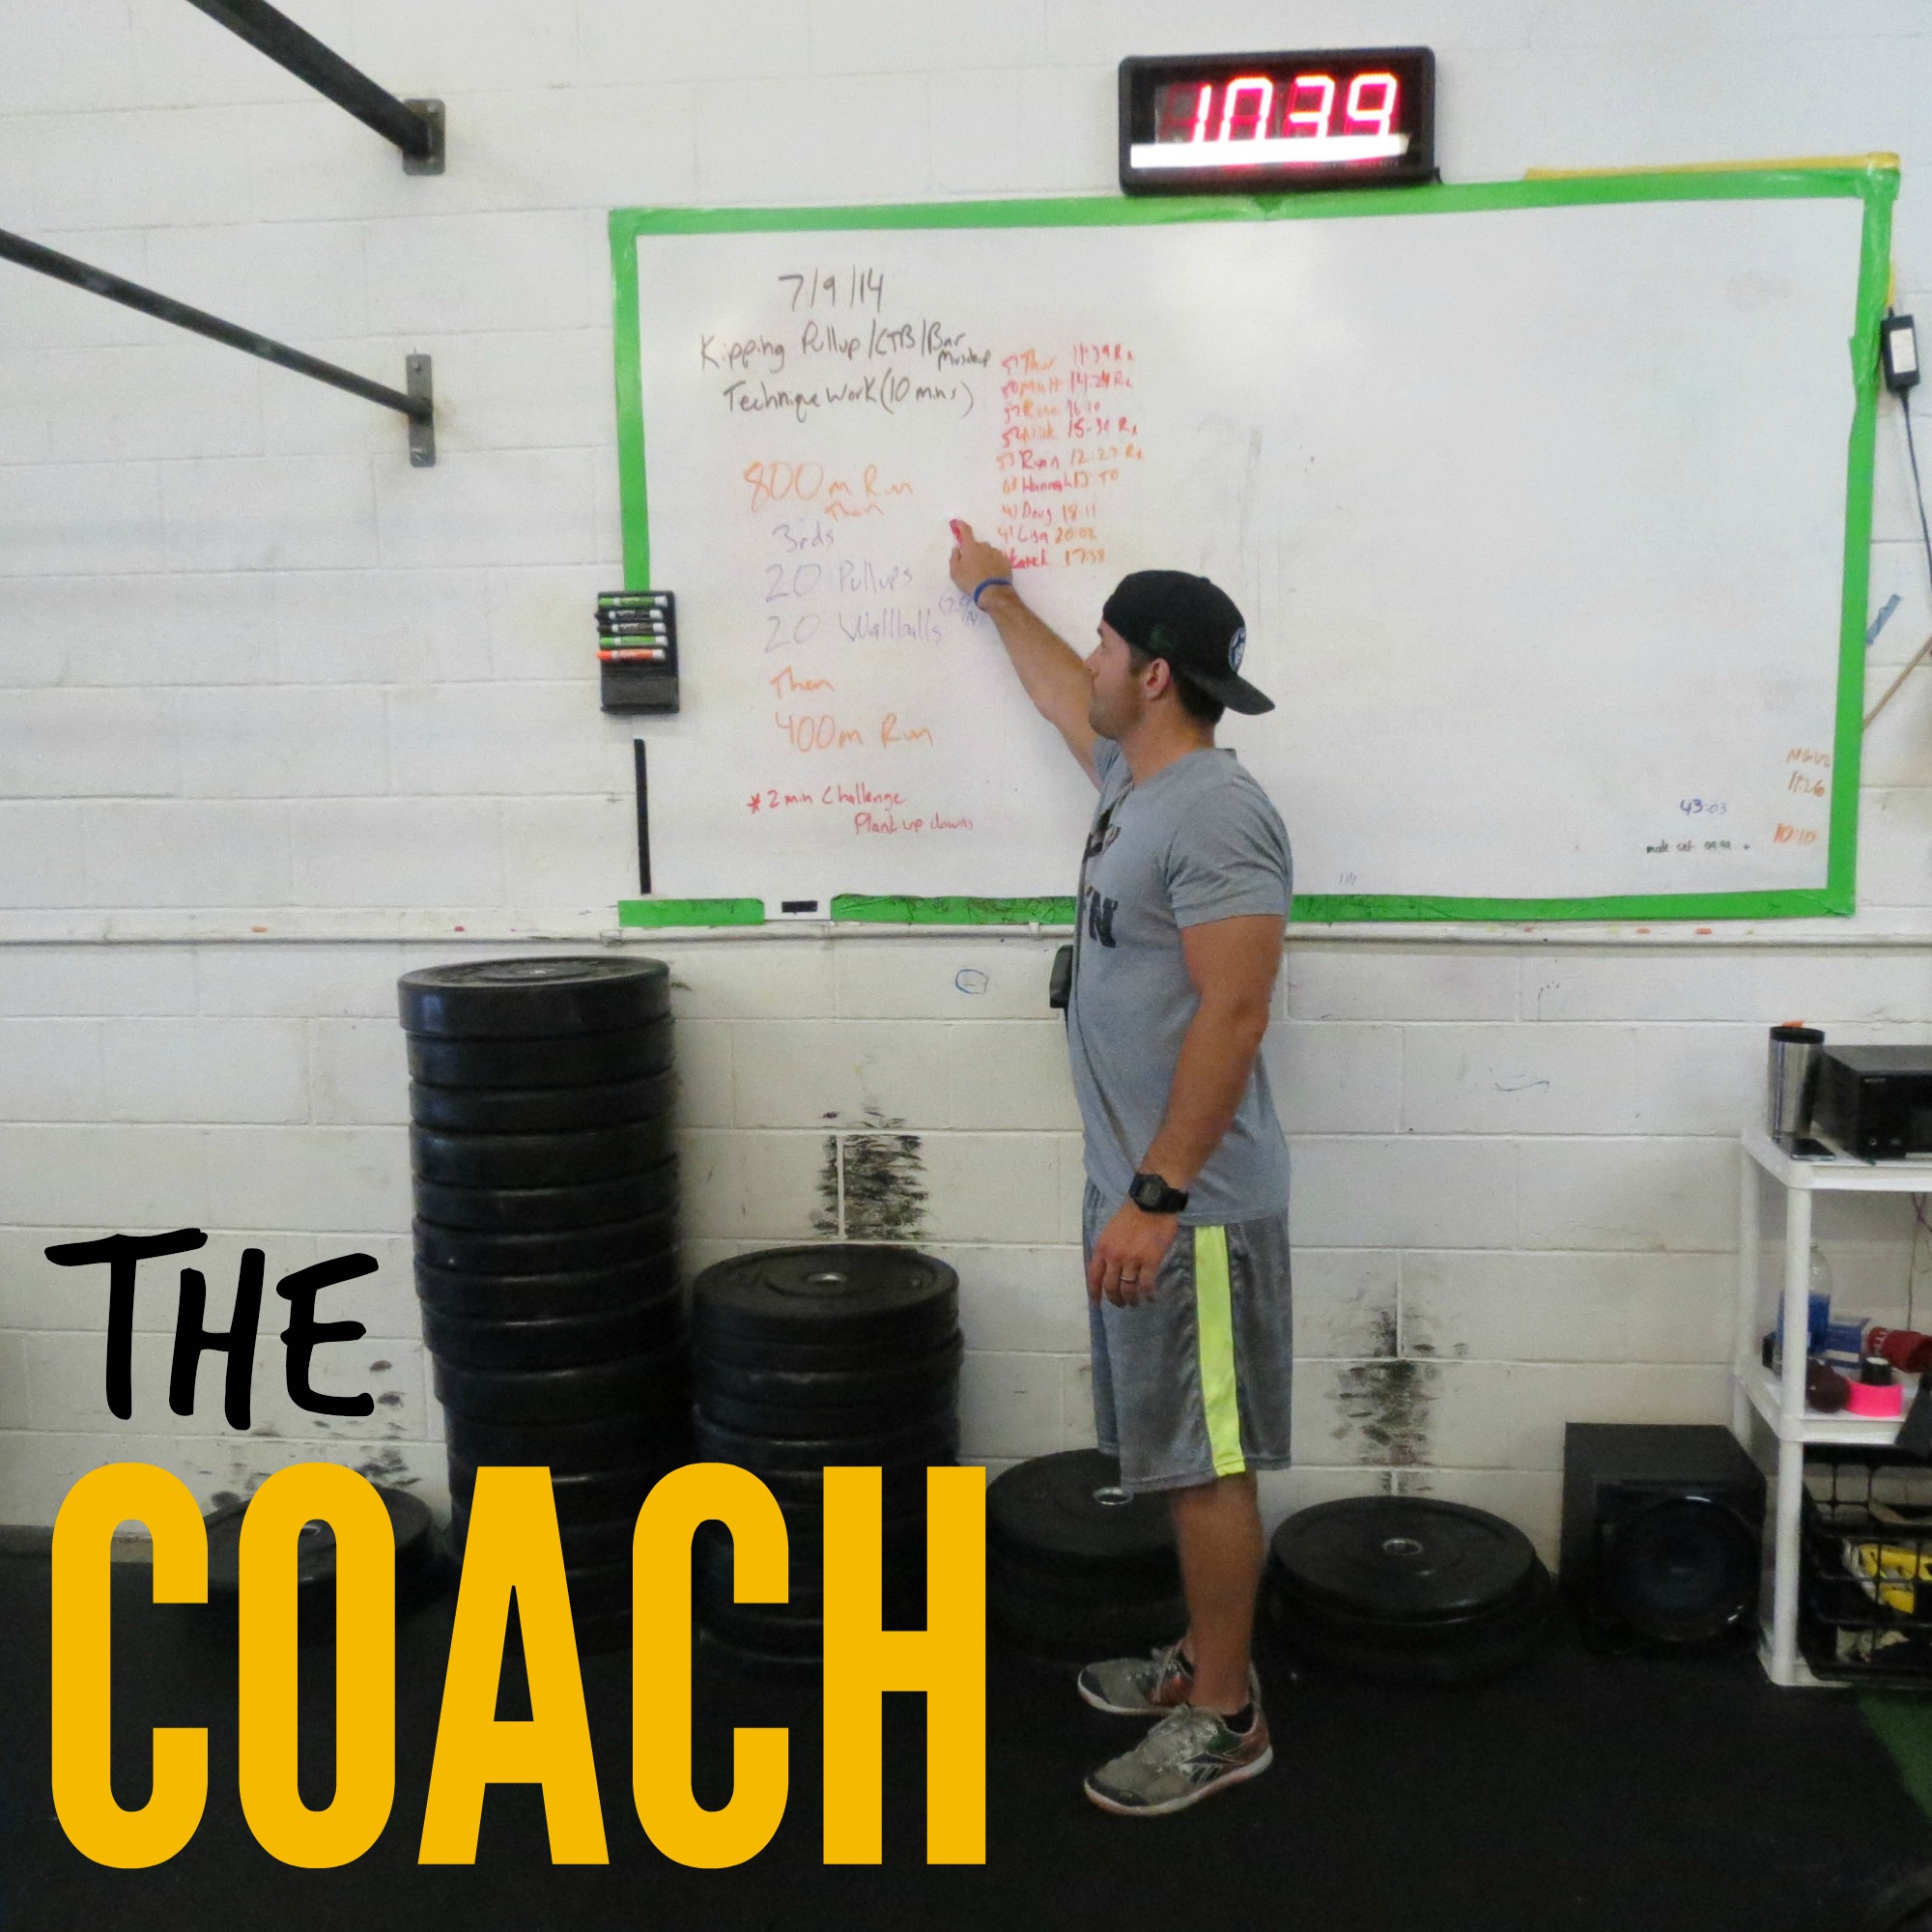 A CrossFit coach describing the WOD for the day at the box.